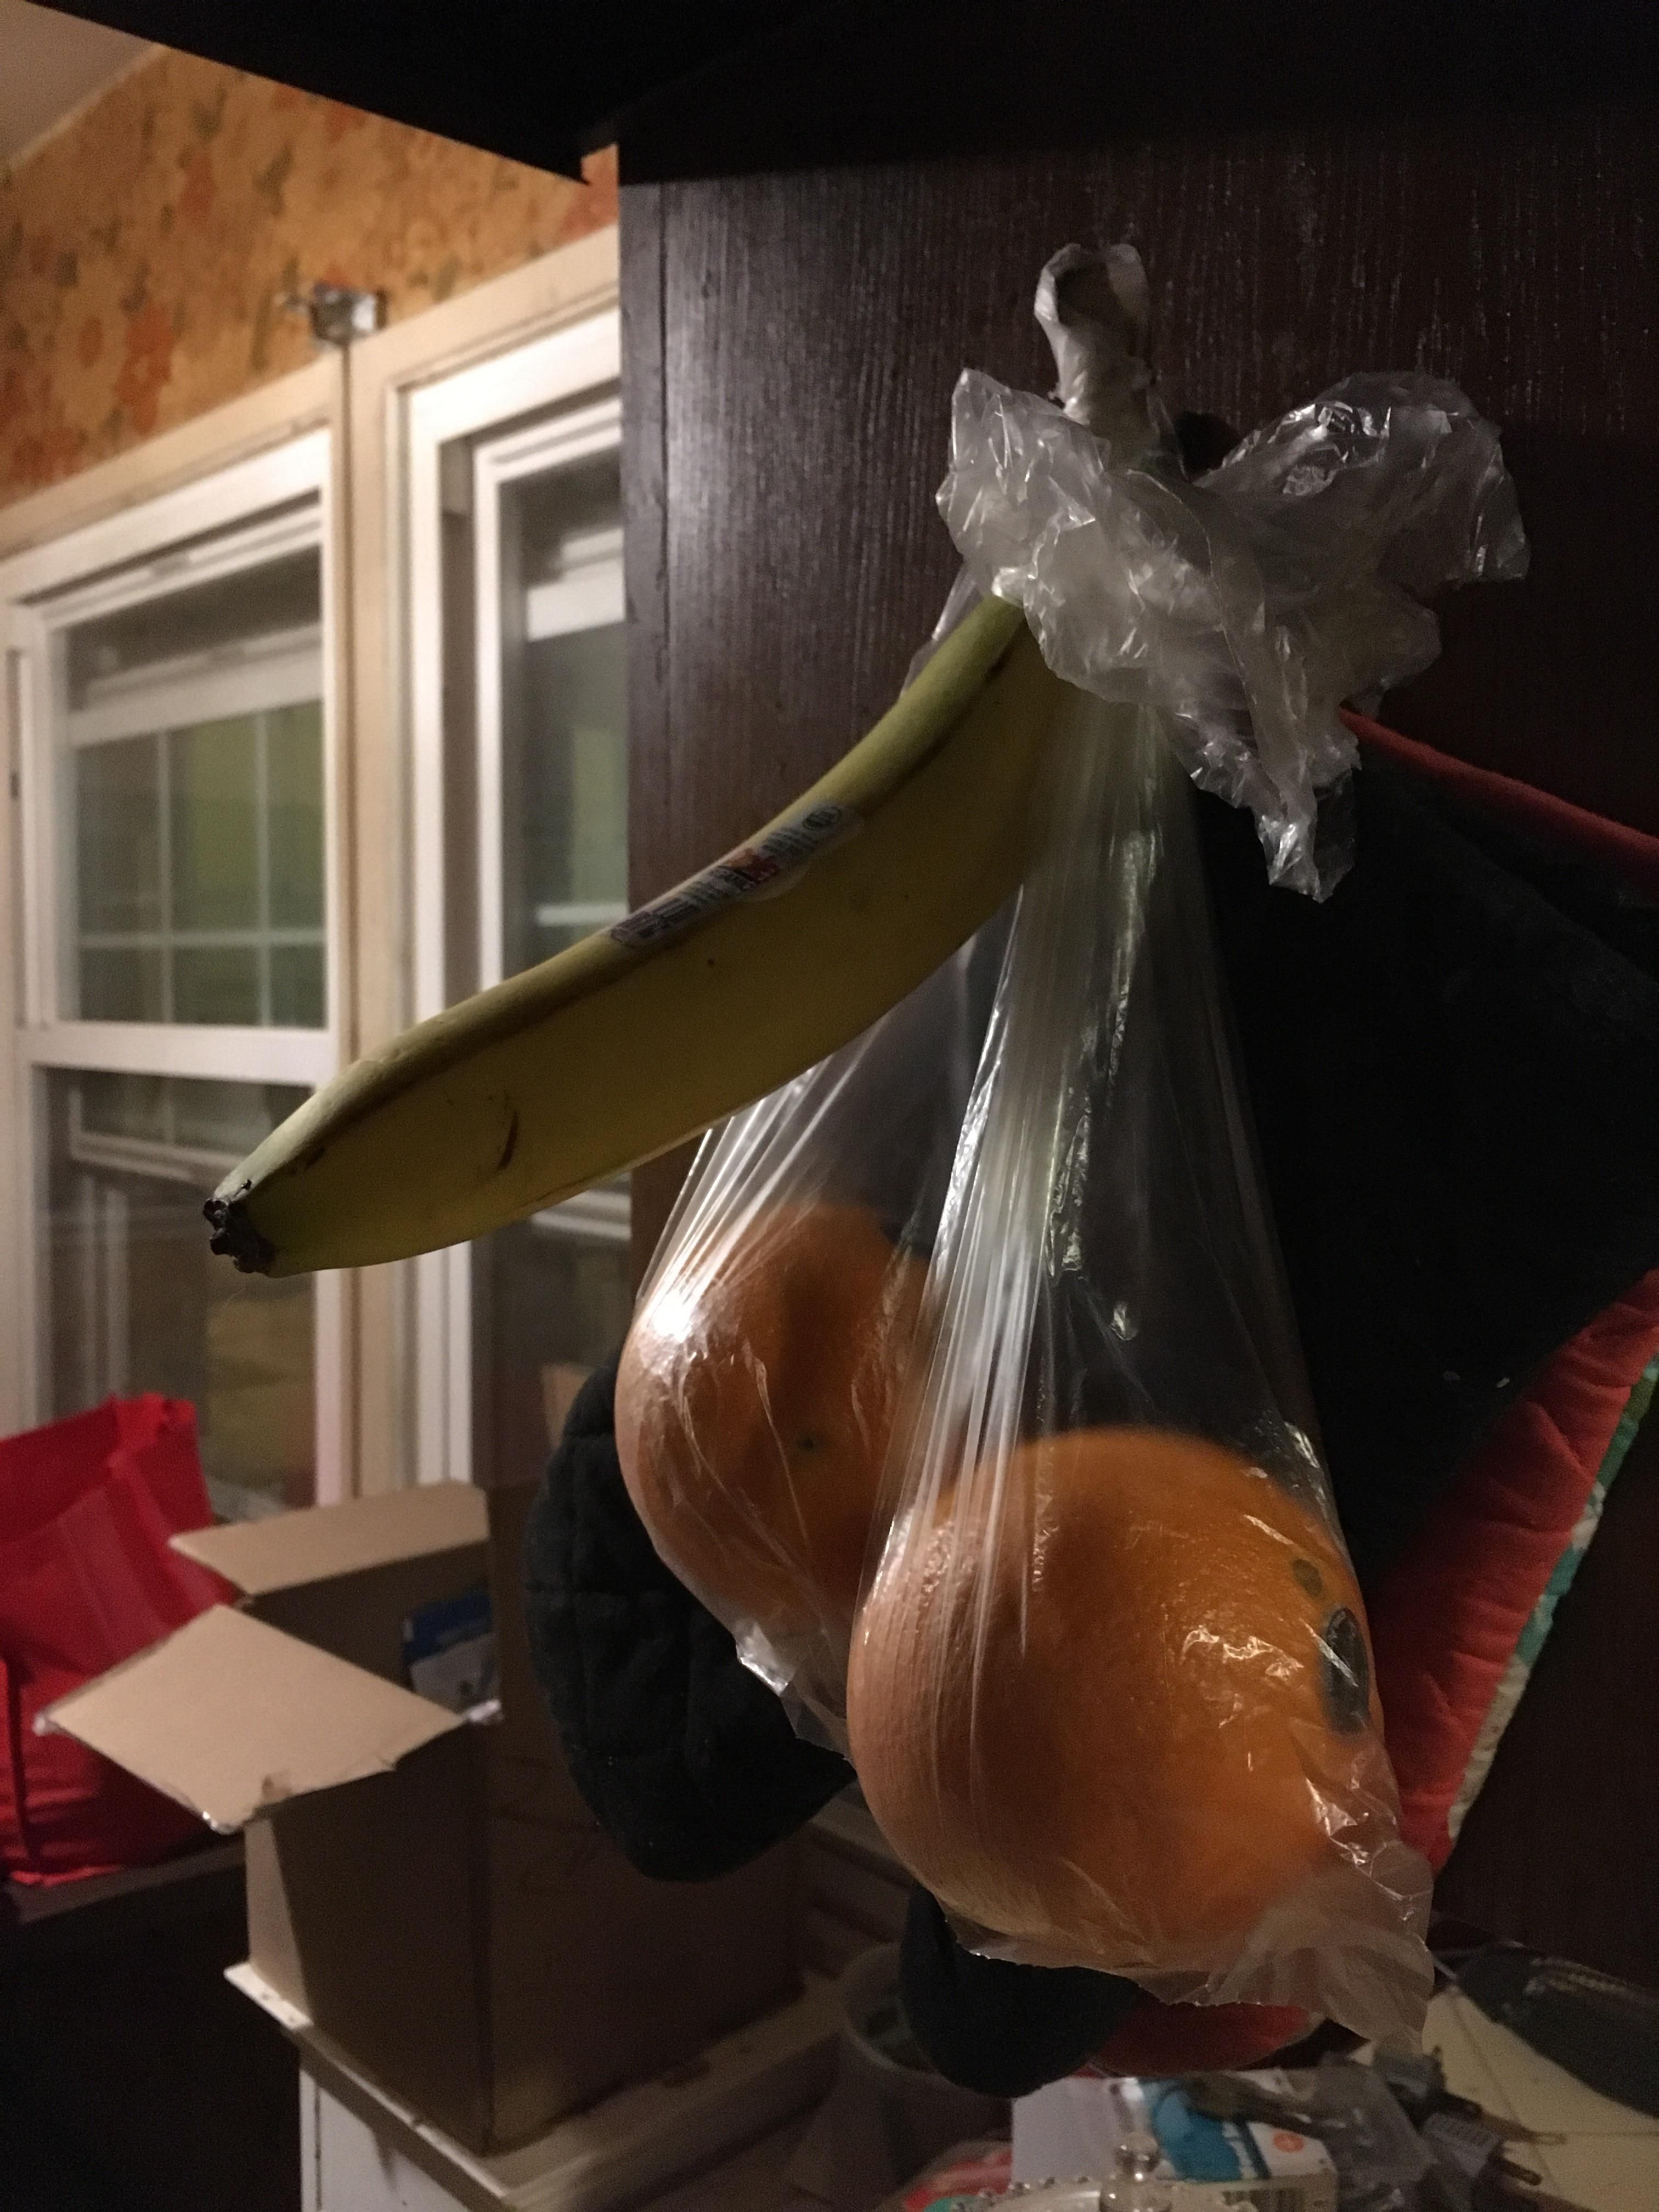 I artfully arrange our fruit at night for my wife to find in the morning.